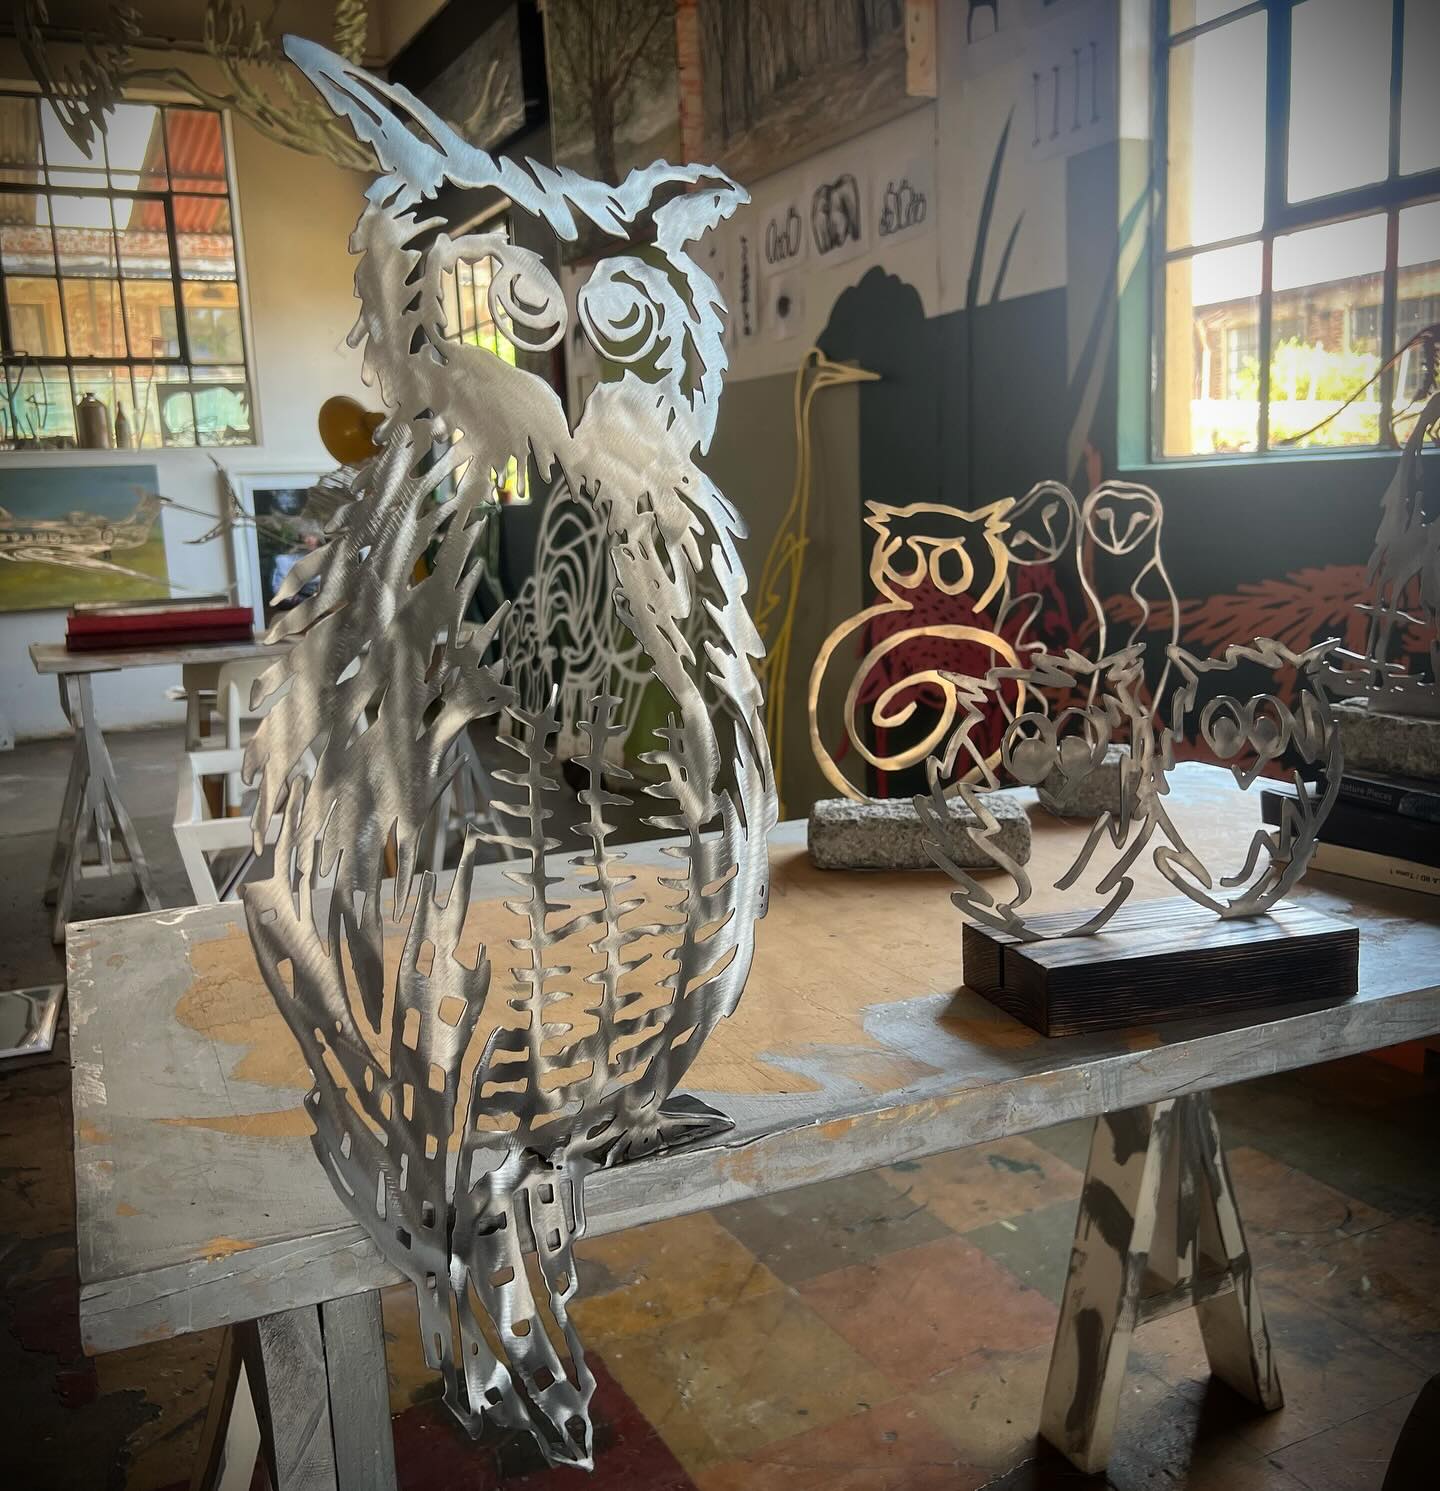 You've spotted them at The Wilds, now see where James Delaney's whimsical creatures have their origin at his Victoria Yards studio.